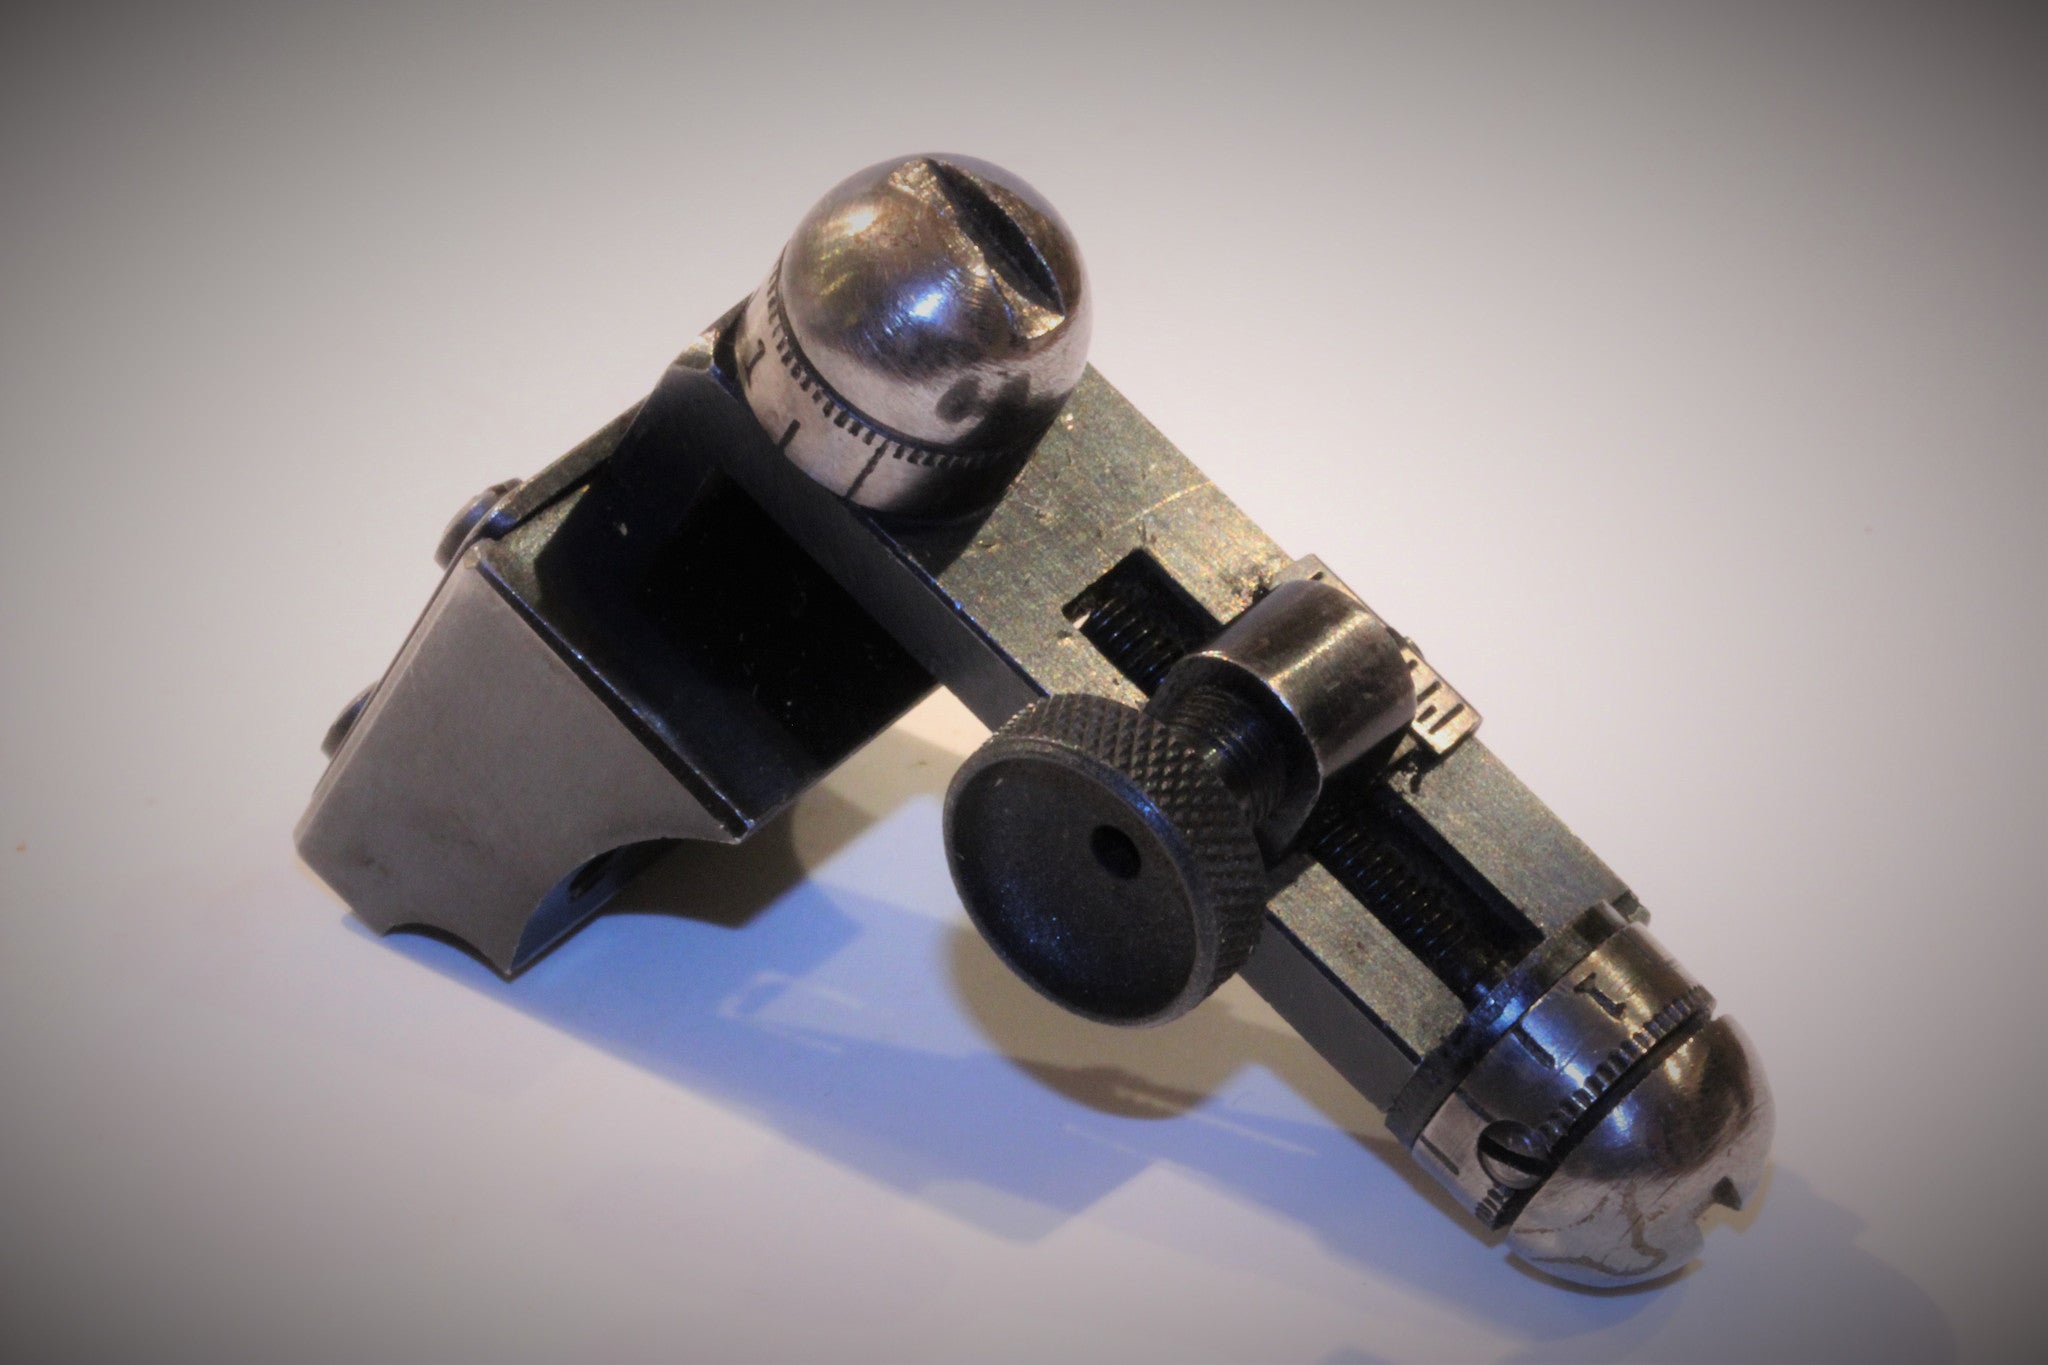 Redfield "70" Receiver Sight